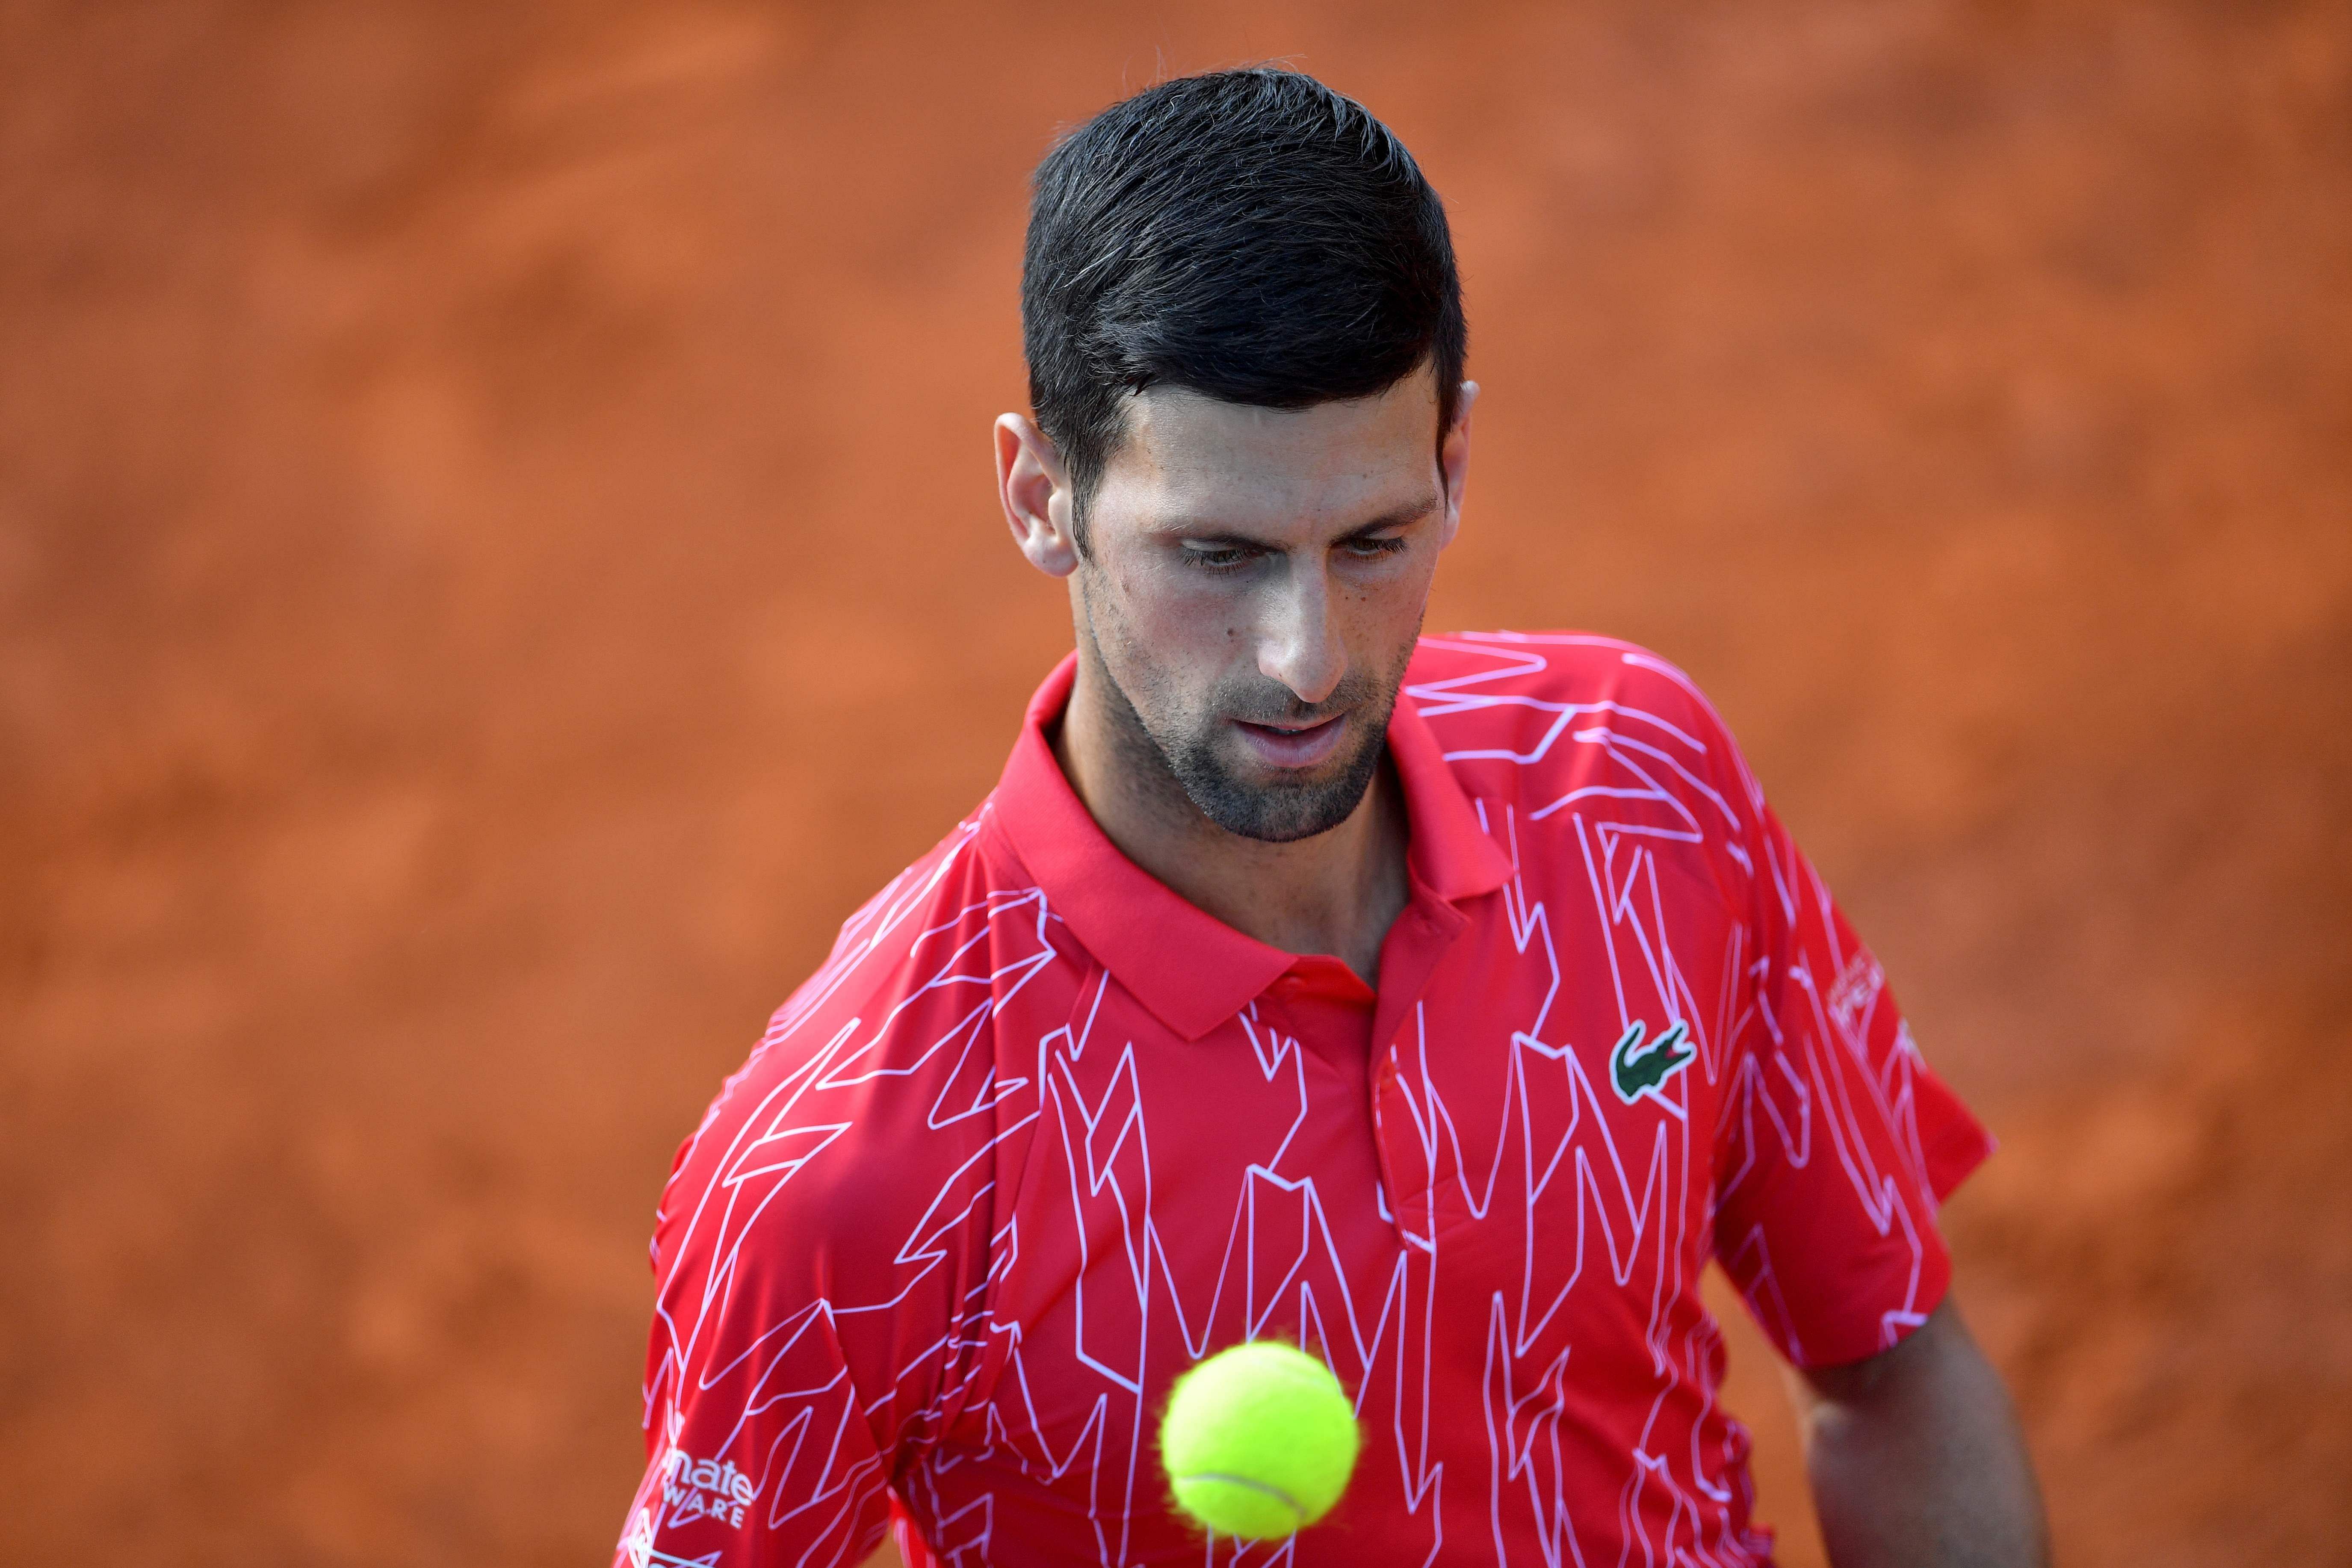 World number one Novak Djokovic lost one of his two opening singles matches on Saturday at the charity tournament he organised, and his day got worse when news broke that one of the event's four legs has been scrapped due to coronavirus concerns. Credit: AFP